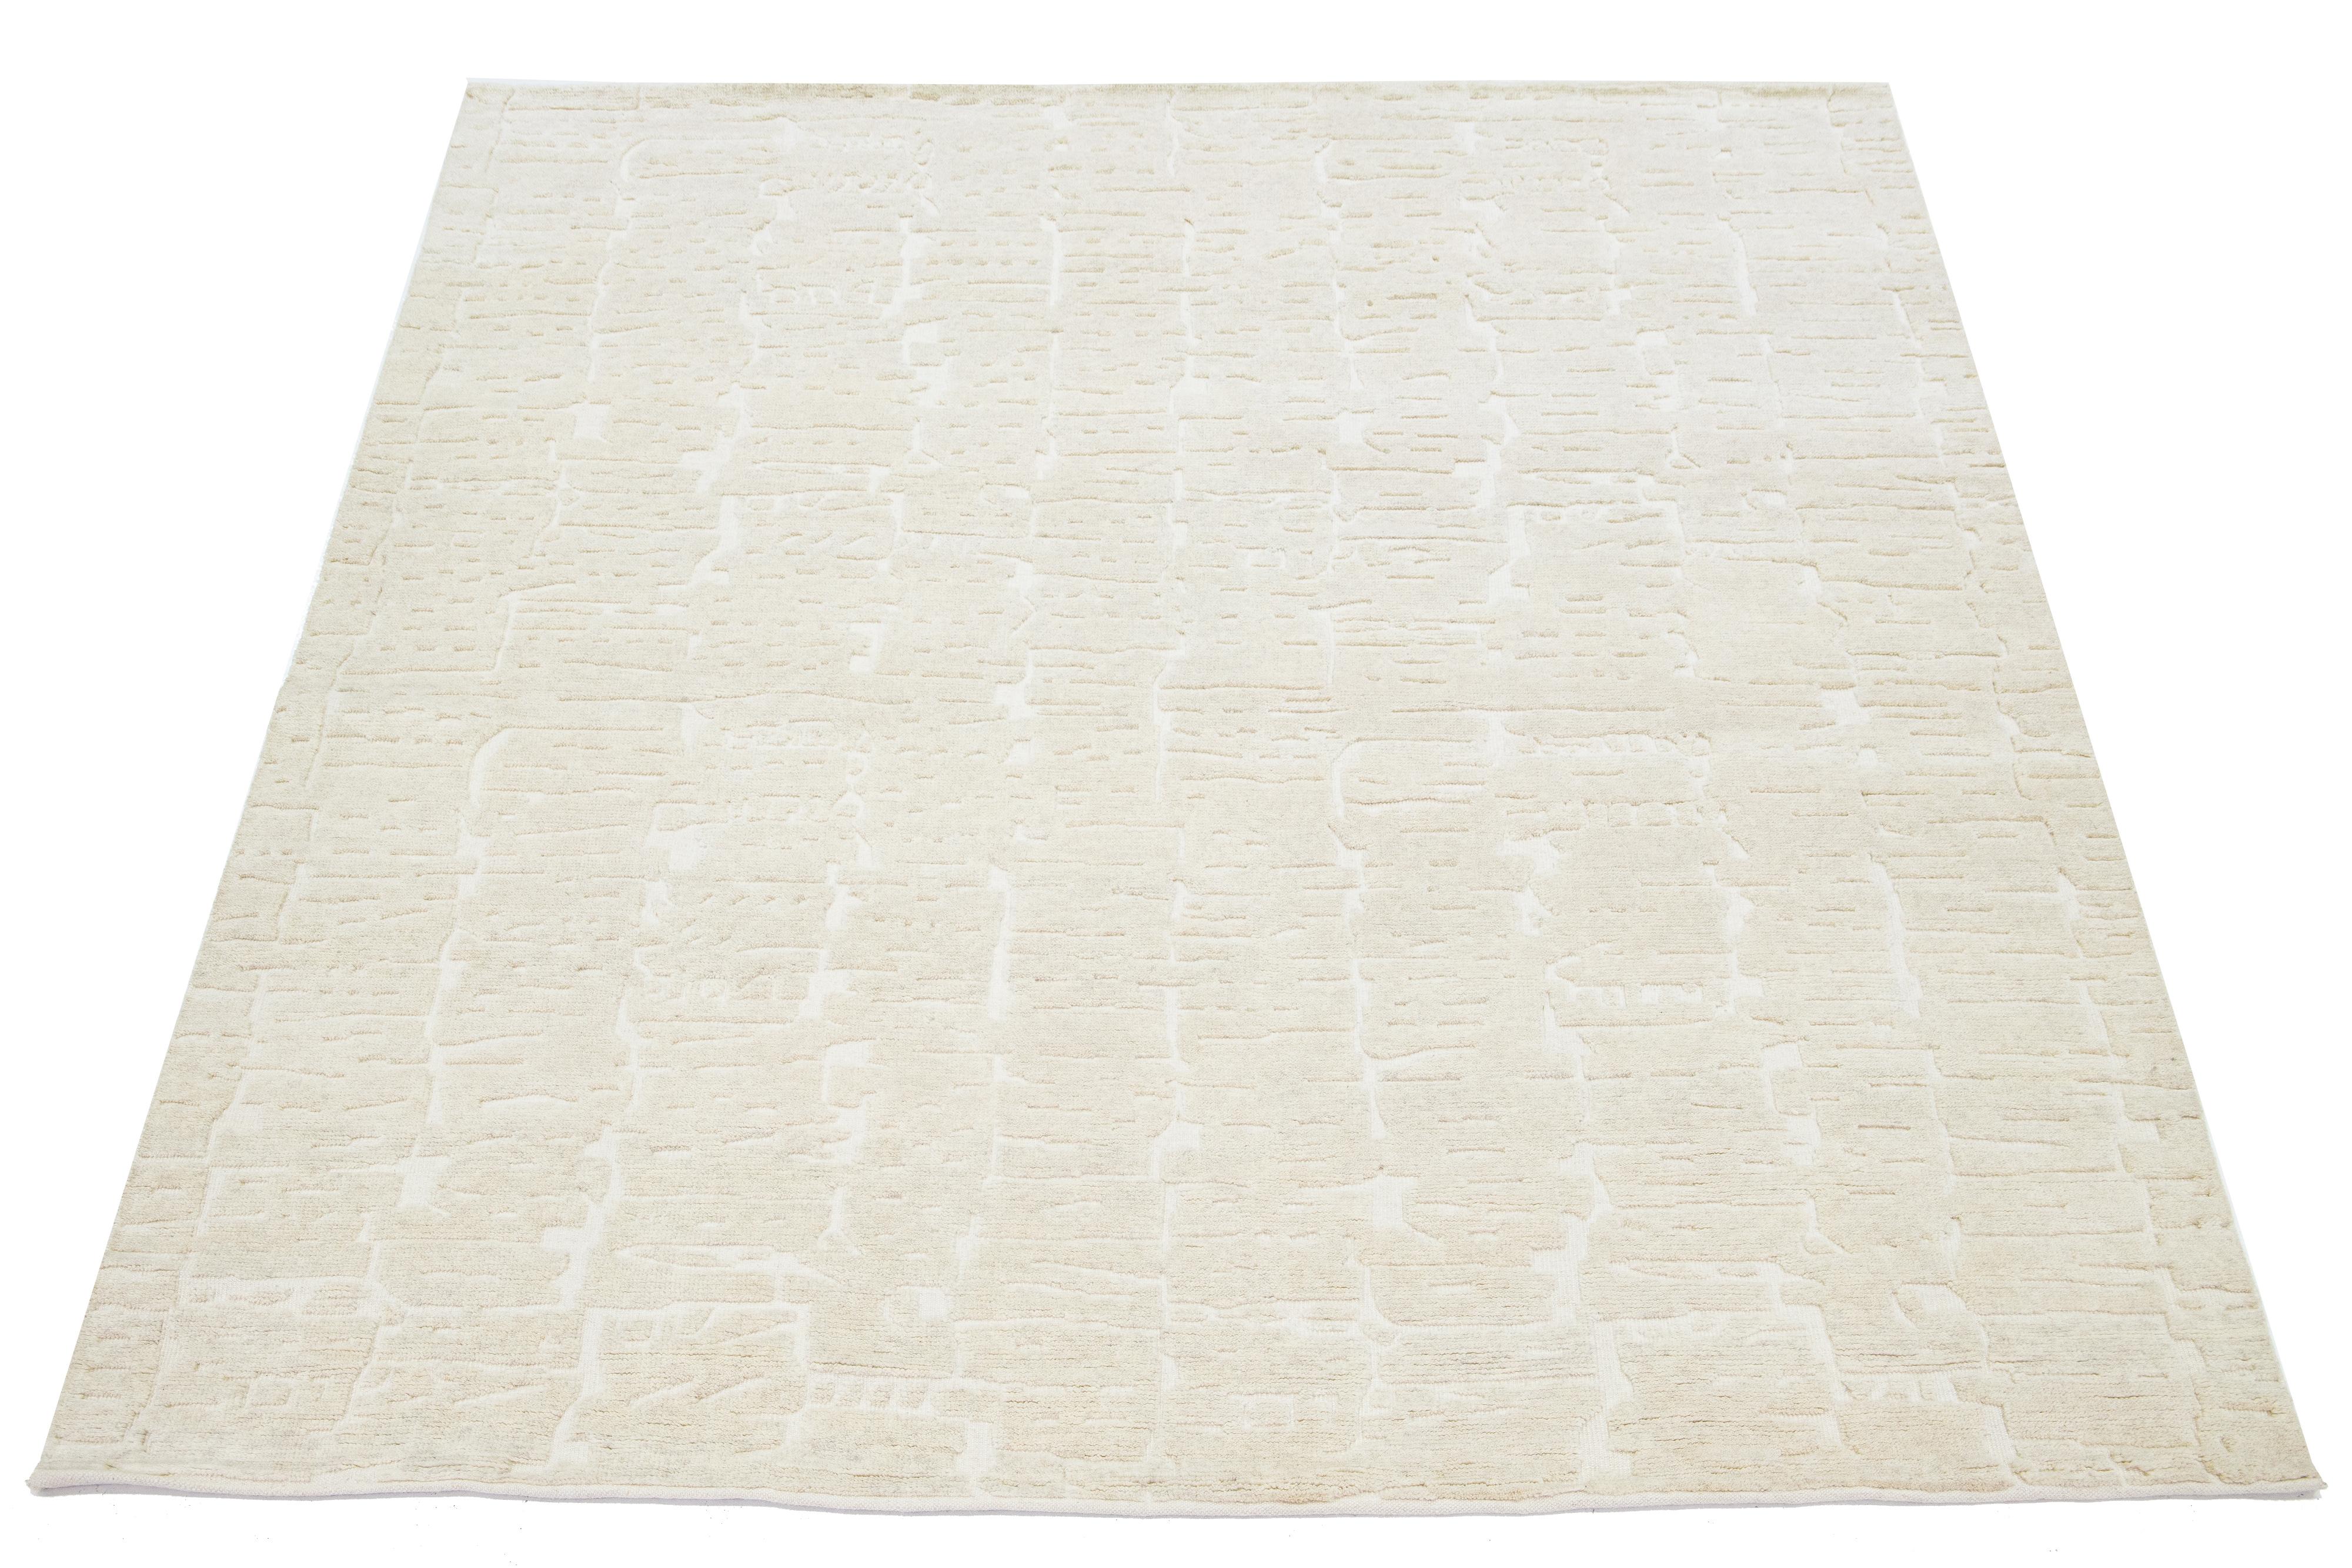 This hand-knotted Moroccan-style wool rug showcases a mesmerizing minimalist aesthetic on a natural ivory field with a contemporary design.

This rug measures 8'1